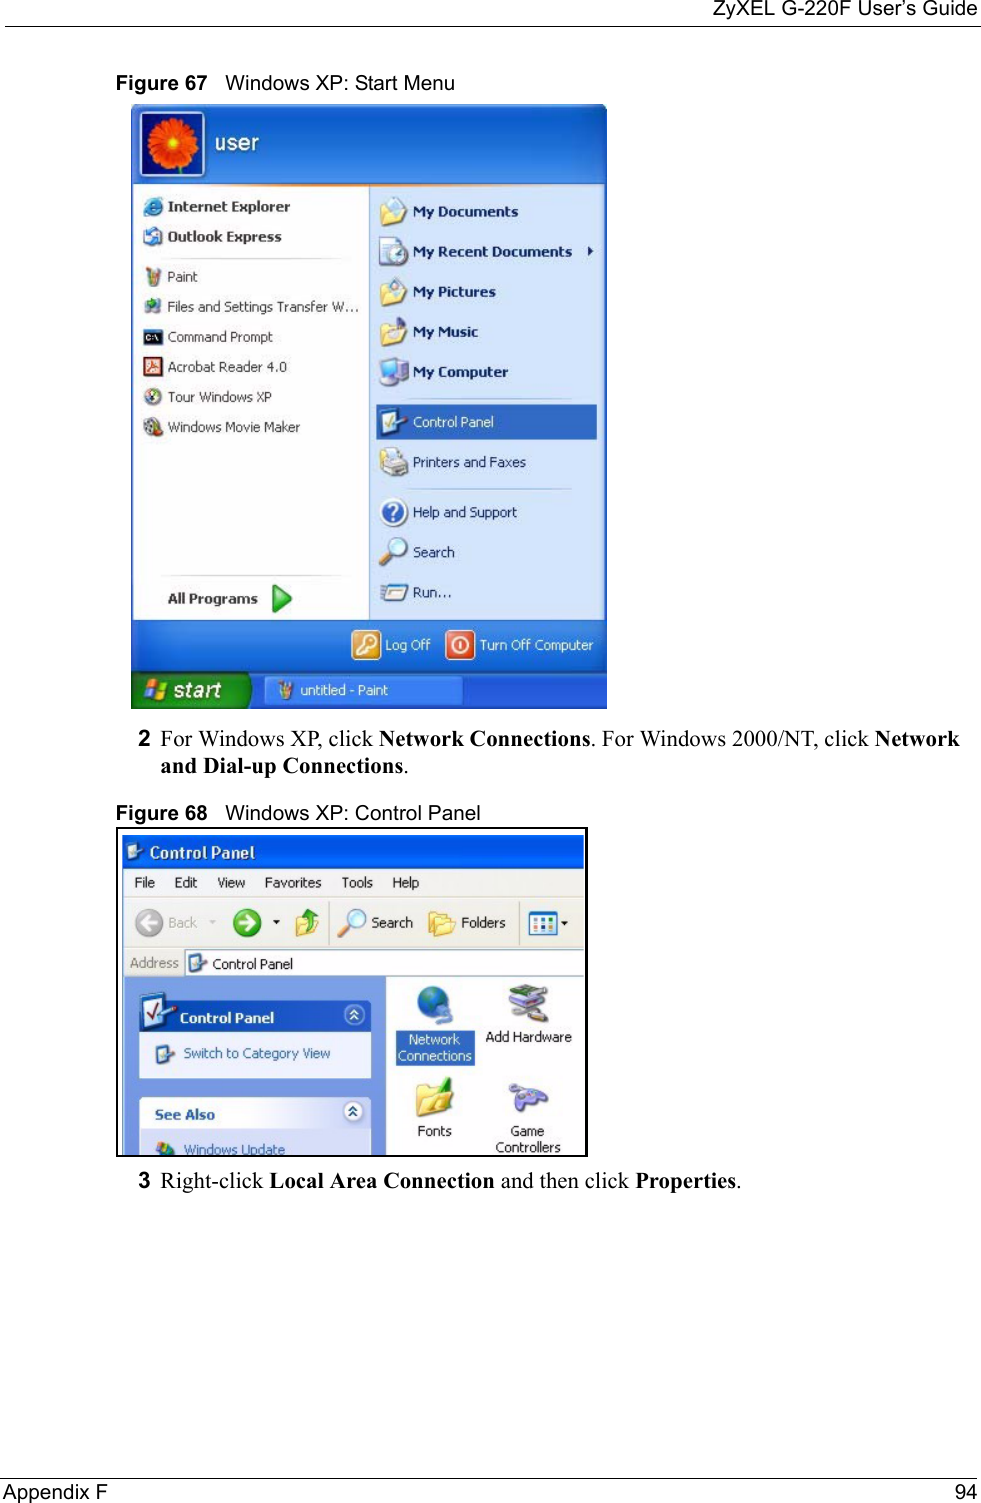 ZyXEL G-220F User’s GuideAppendix F 94Figure 67   Windows XP: Start Menu2For Windows XP, click Network Connections. For Windows 2000/NT, click Network and Dial-up Connections.Figure 68   Windows XP: Control Panel3Right-click Local Area Connection and then click Properties.